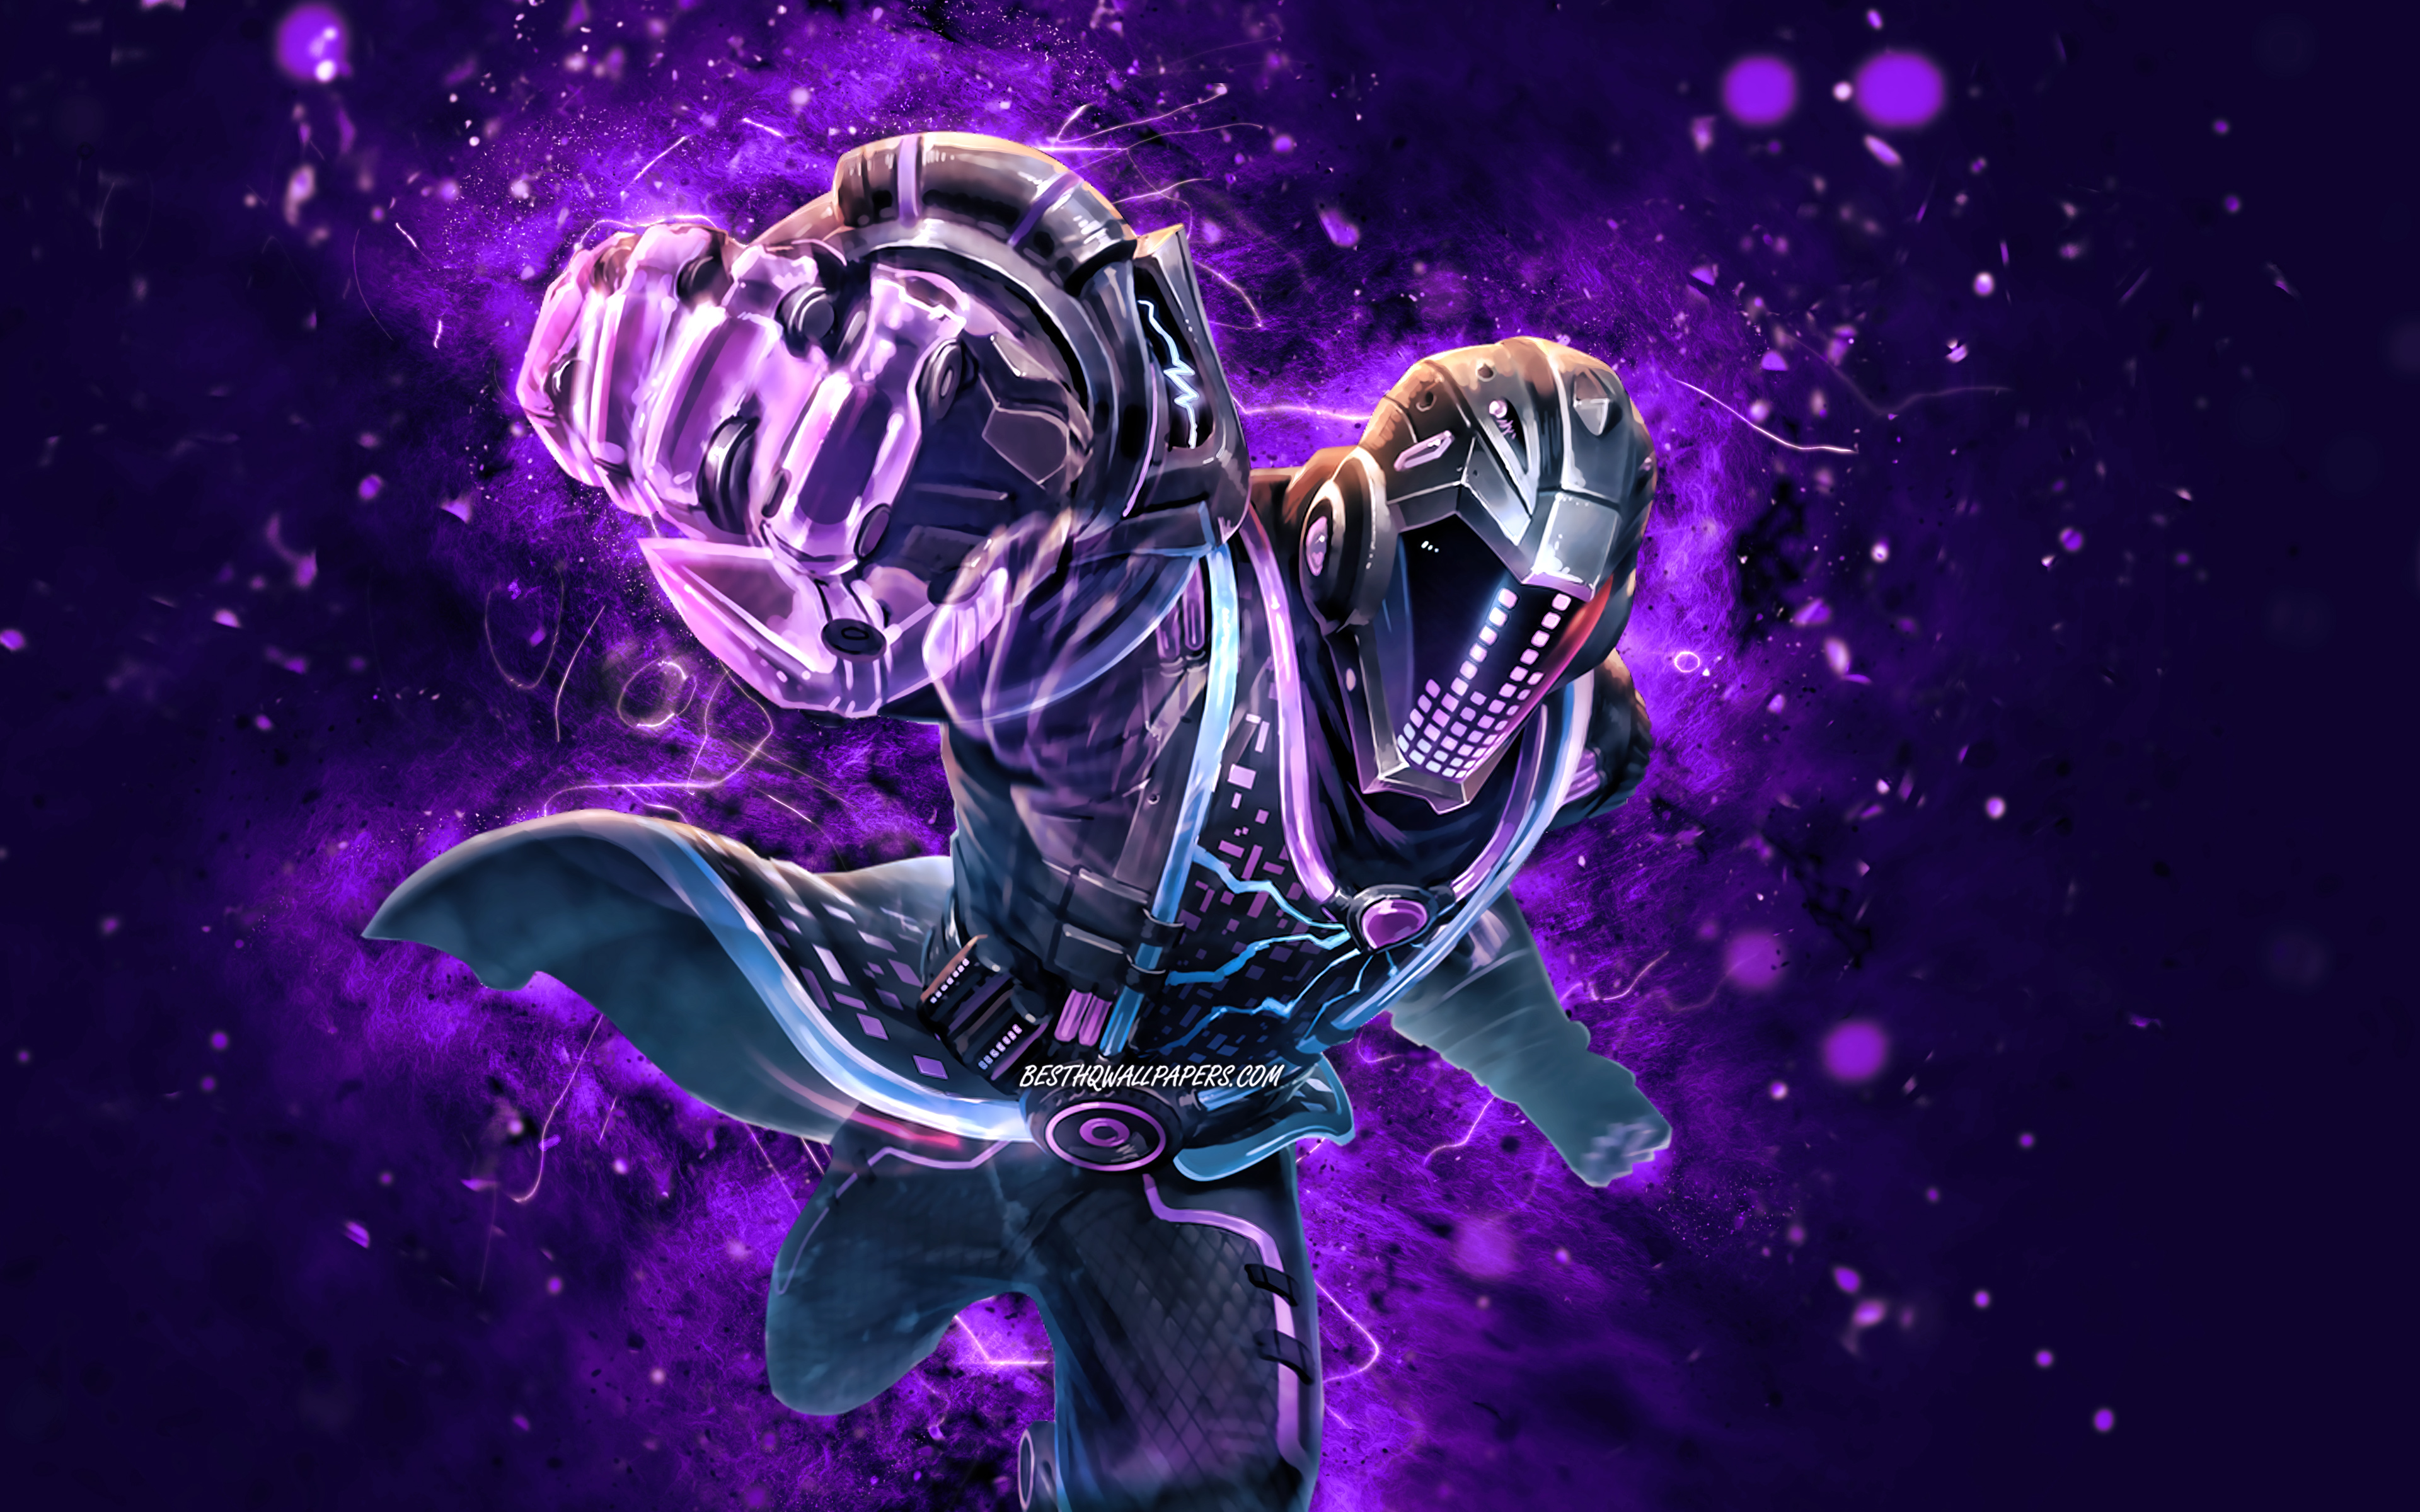 Download wallpapers Ravin Ravana, 4k, violet neon lights, Smite, creative,  Smite characters, Ravin Ravana Skin, Ravin Ravana Smite for desktop with  resolution 3840x2400. High Quality HD pictures wallpapers